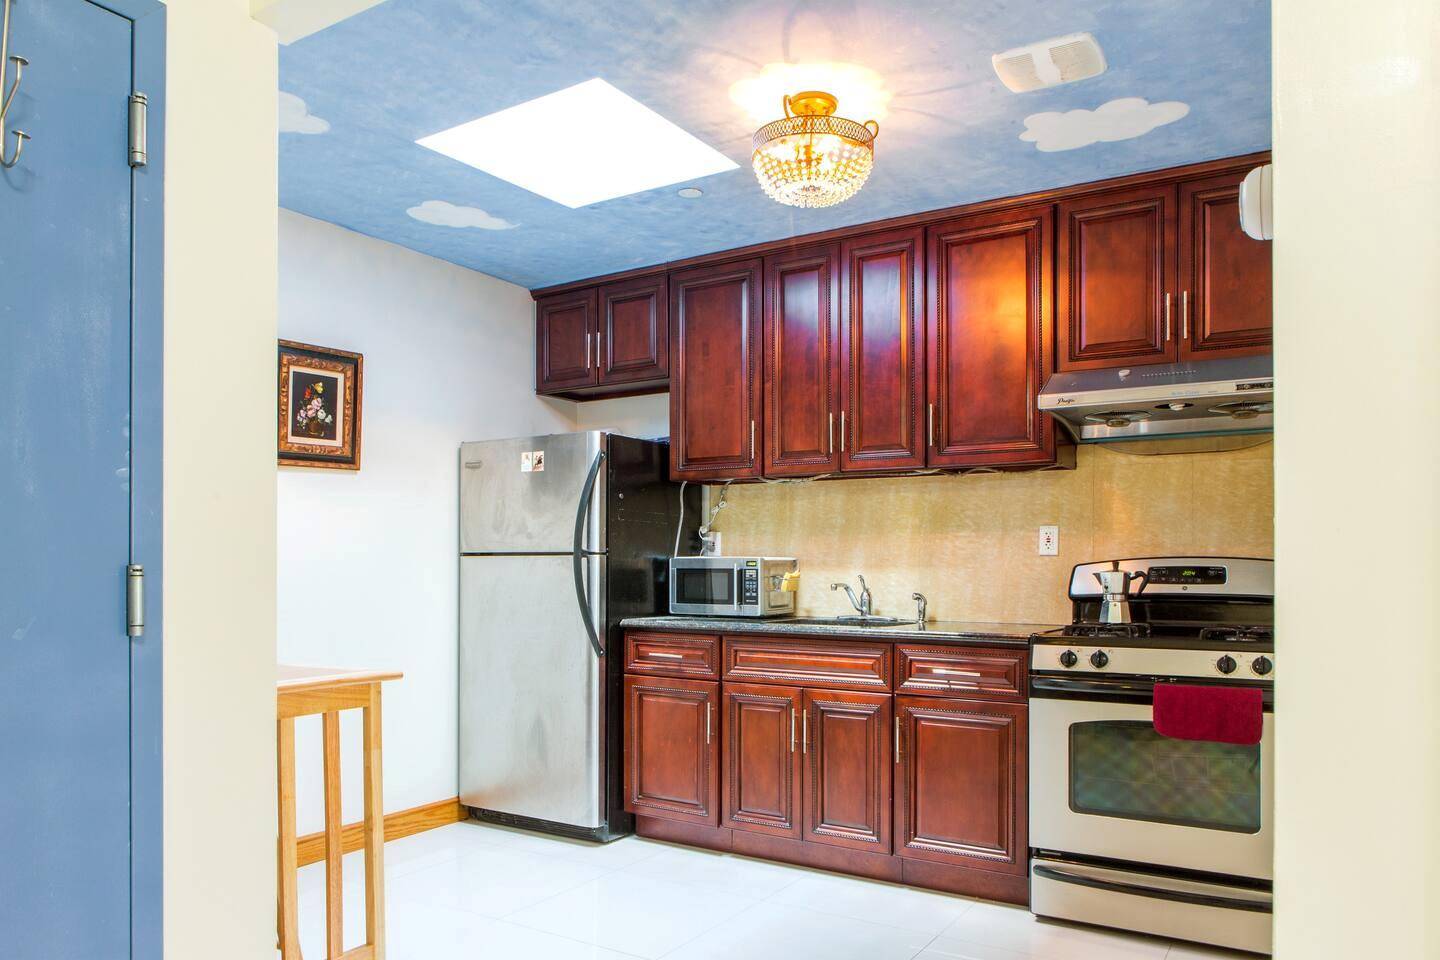 A super bright, beautifully furnished 2 Beds 1 Bath PH unit in a prime location in Elmhurst is available on June 15th, 2020.